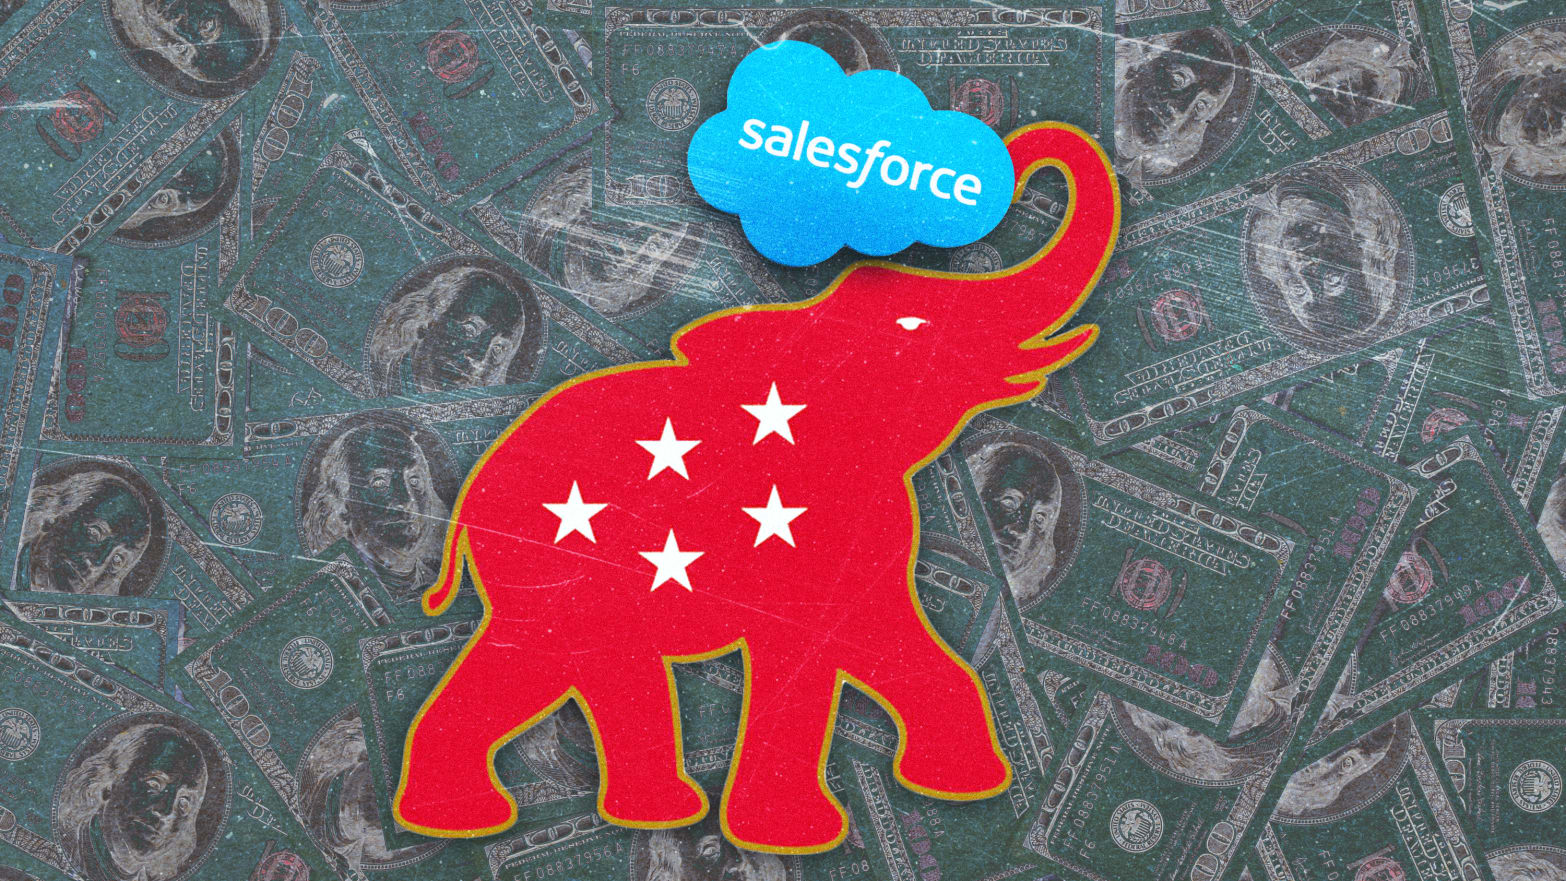 Illustration of a red Elephant (RNC) and a salesforce logo